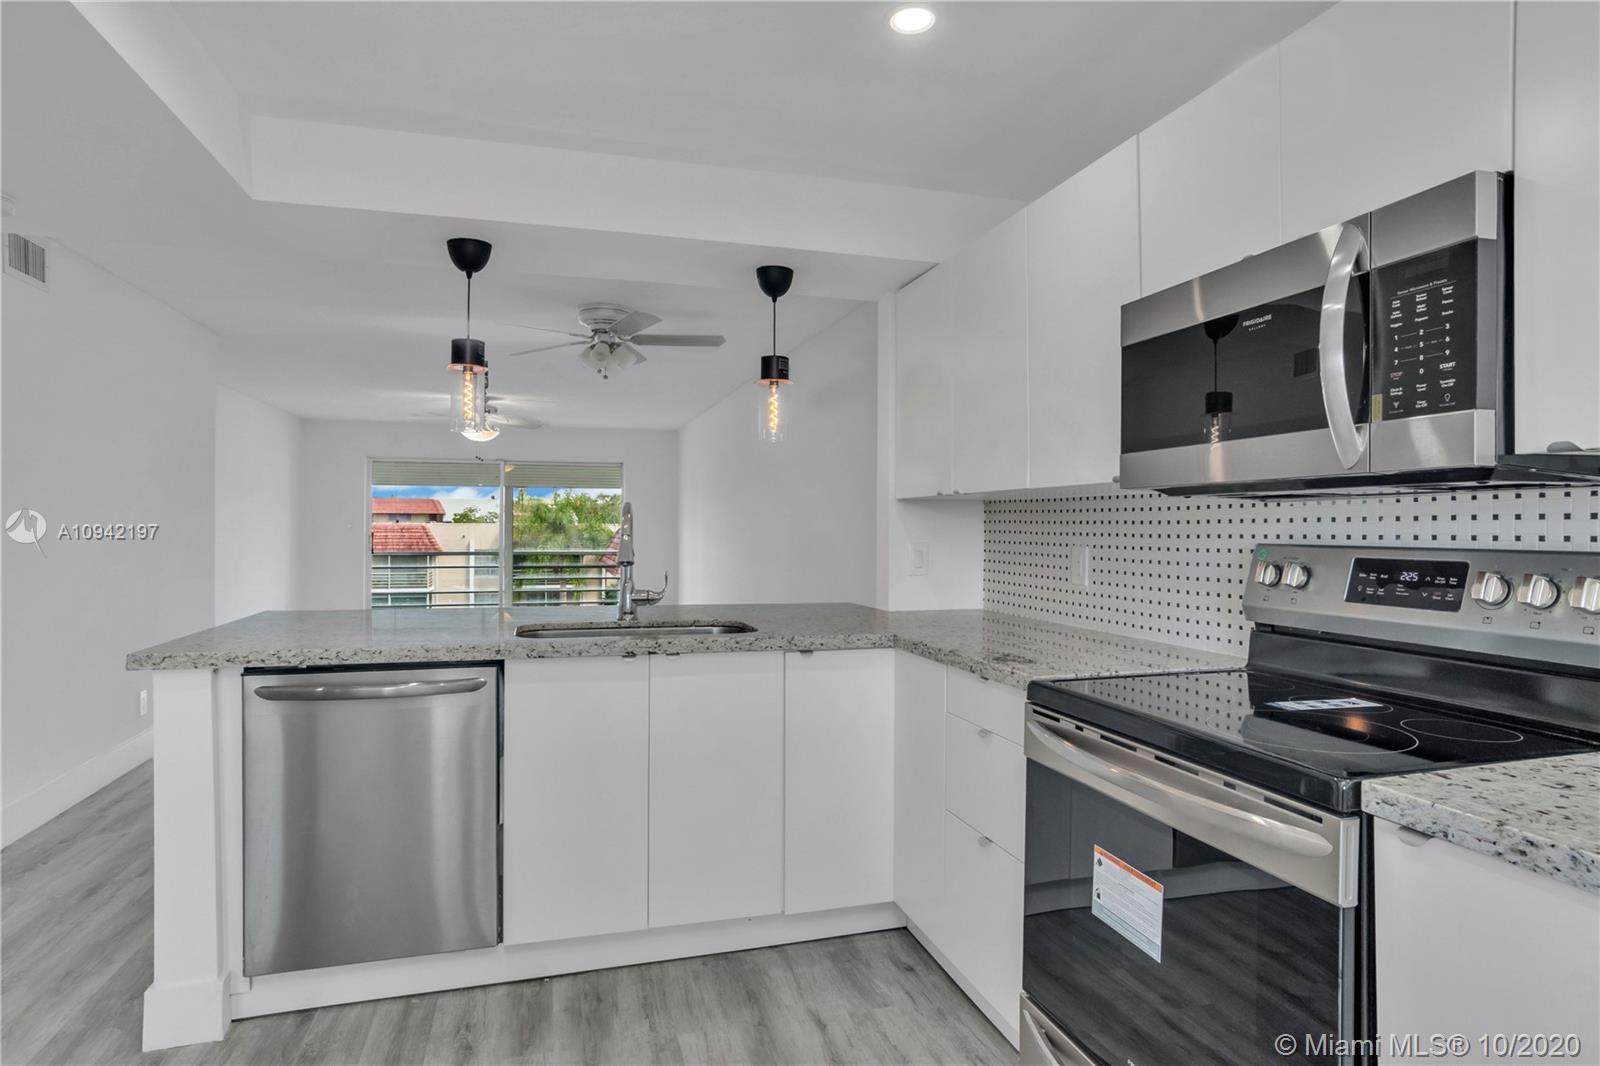 Completely renovated kitchen with granite countertop, brand new stainless steel appliances, cabinets,lighting